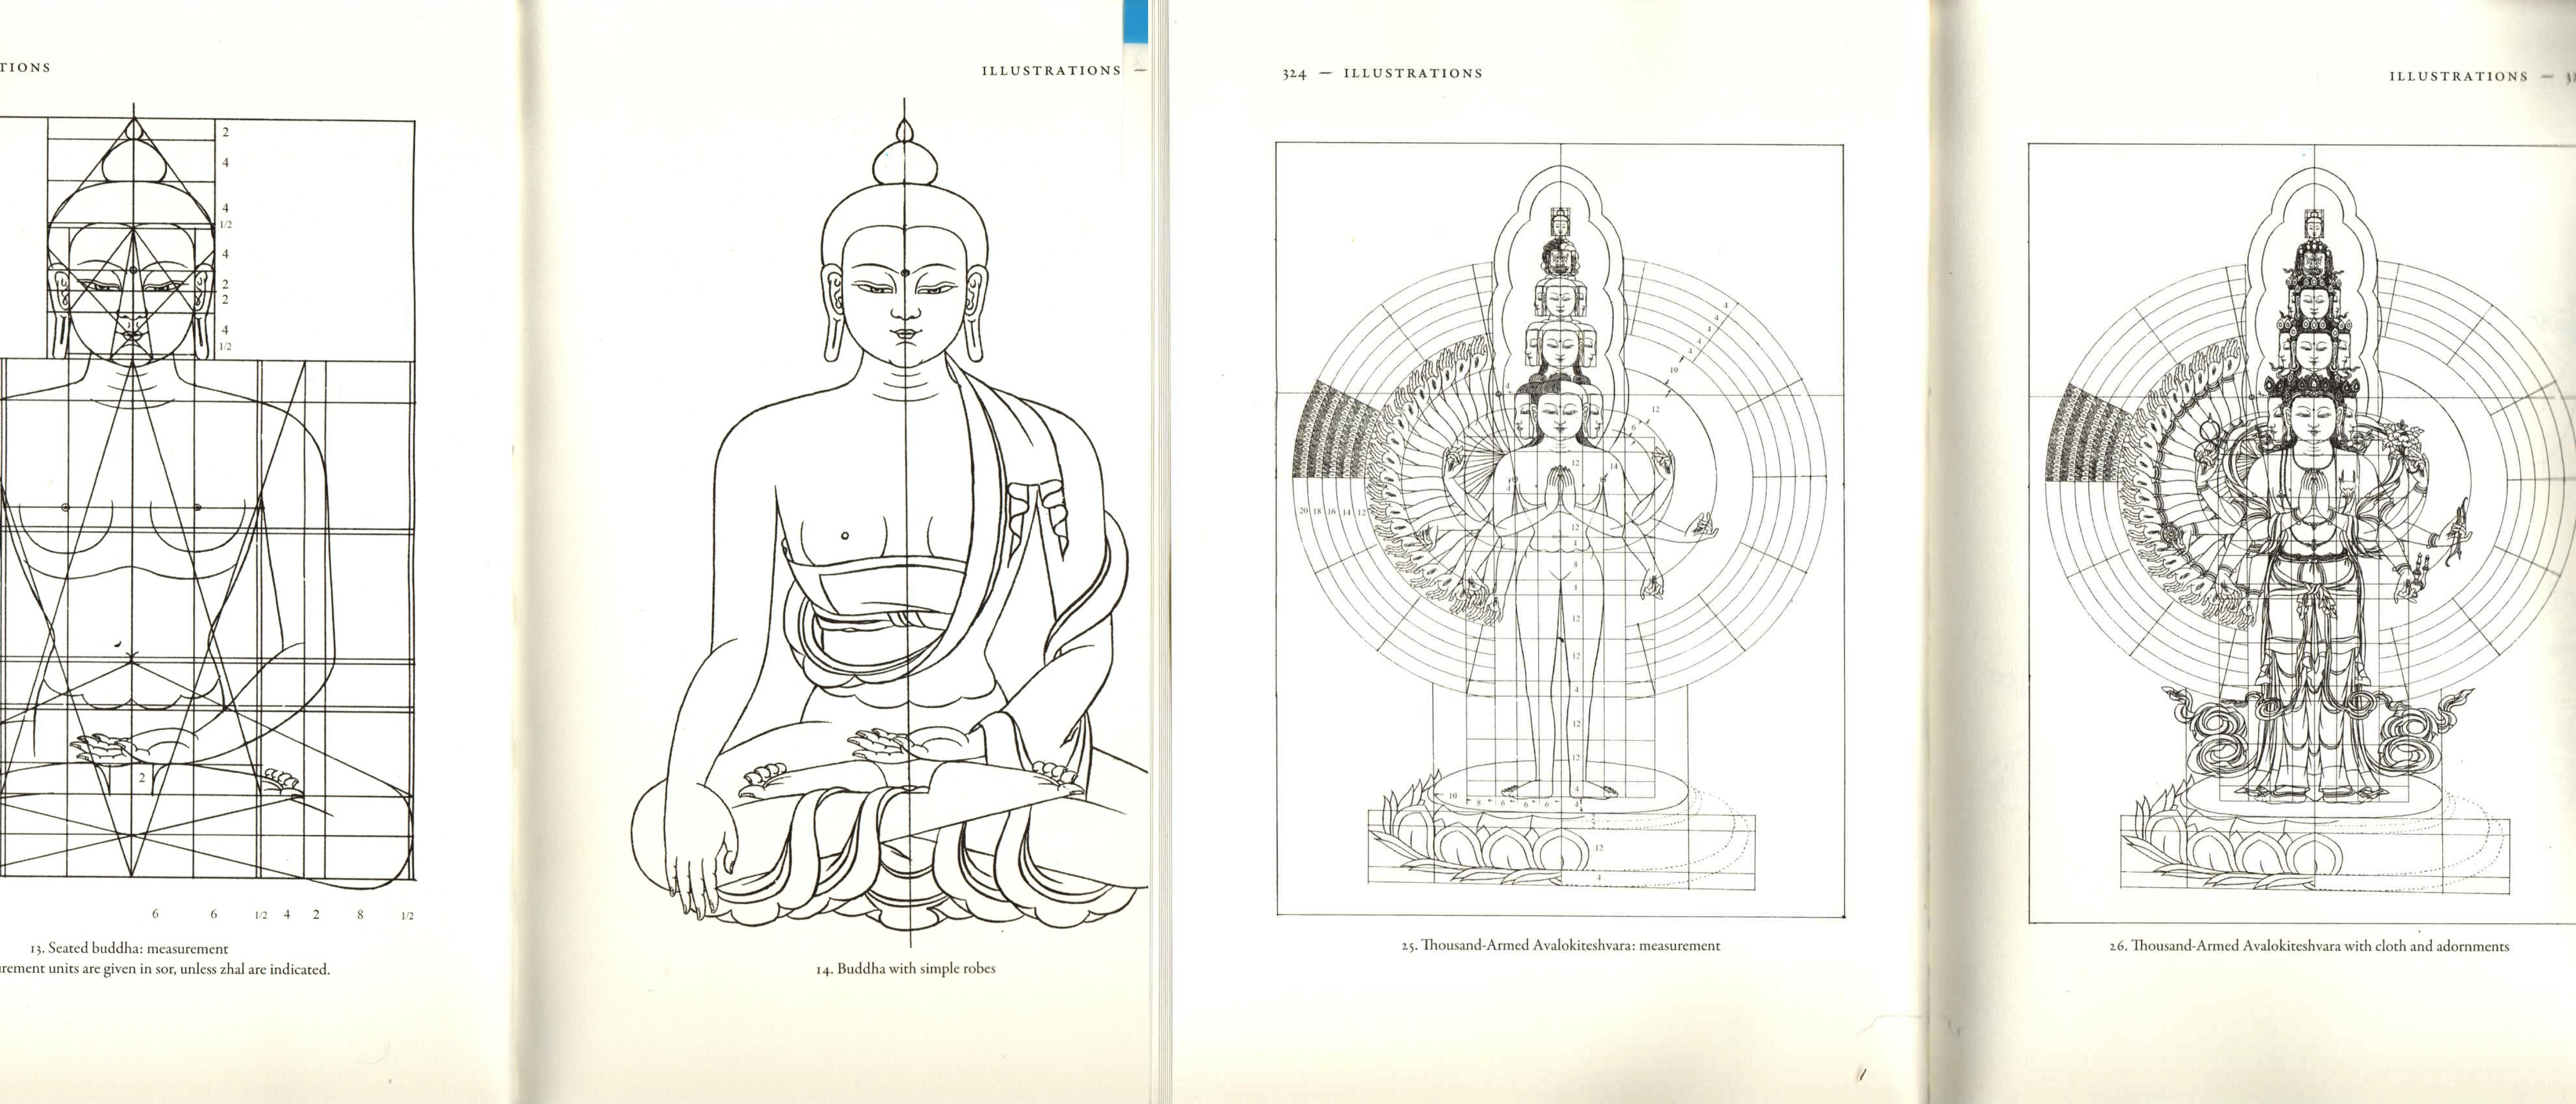 Scanned pages from The Art ofAwakening showing the grid for a seated Buddha and for the standing, thousand-armed Avalokiteshvara.